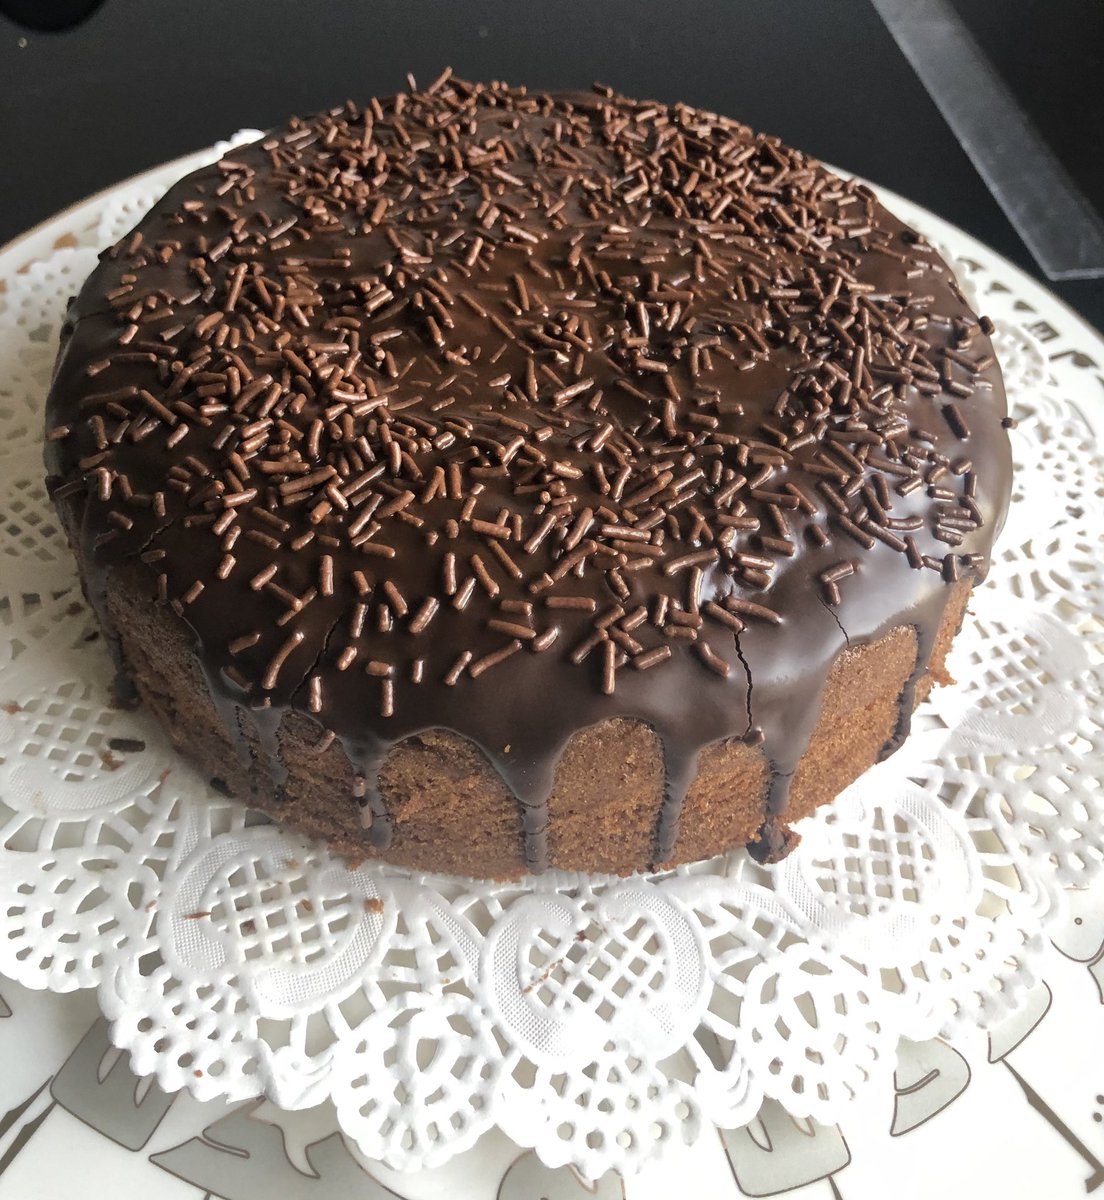 Baking is my therapy, and cake is my reward.♥️ Indulge in rich and decadent chocolate cake. Made with finest chocolate and topped with velvety chocolate and amazing delicious Dutch chocolate sprinkles😋🍫🍰🍫☕️ #forcakelovers #chocolatemood